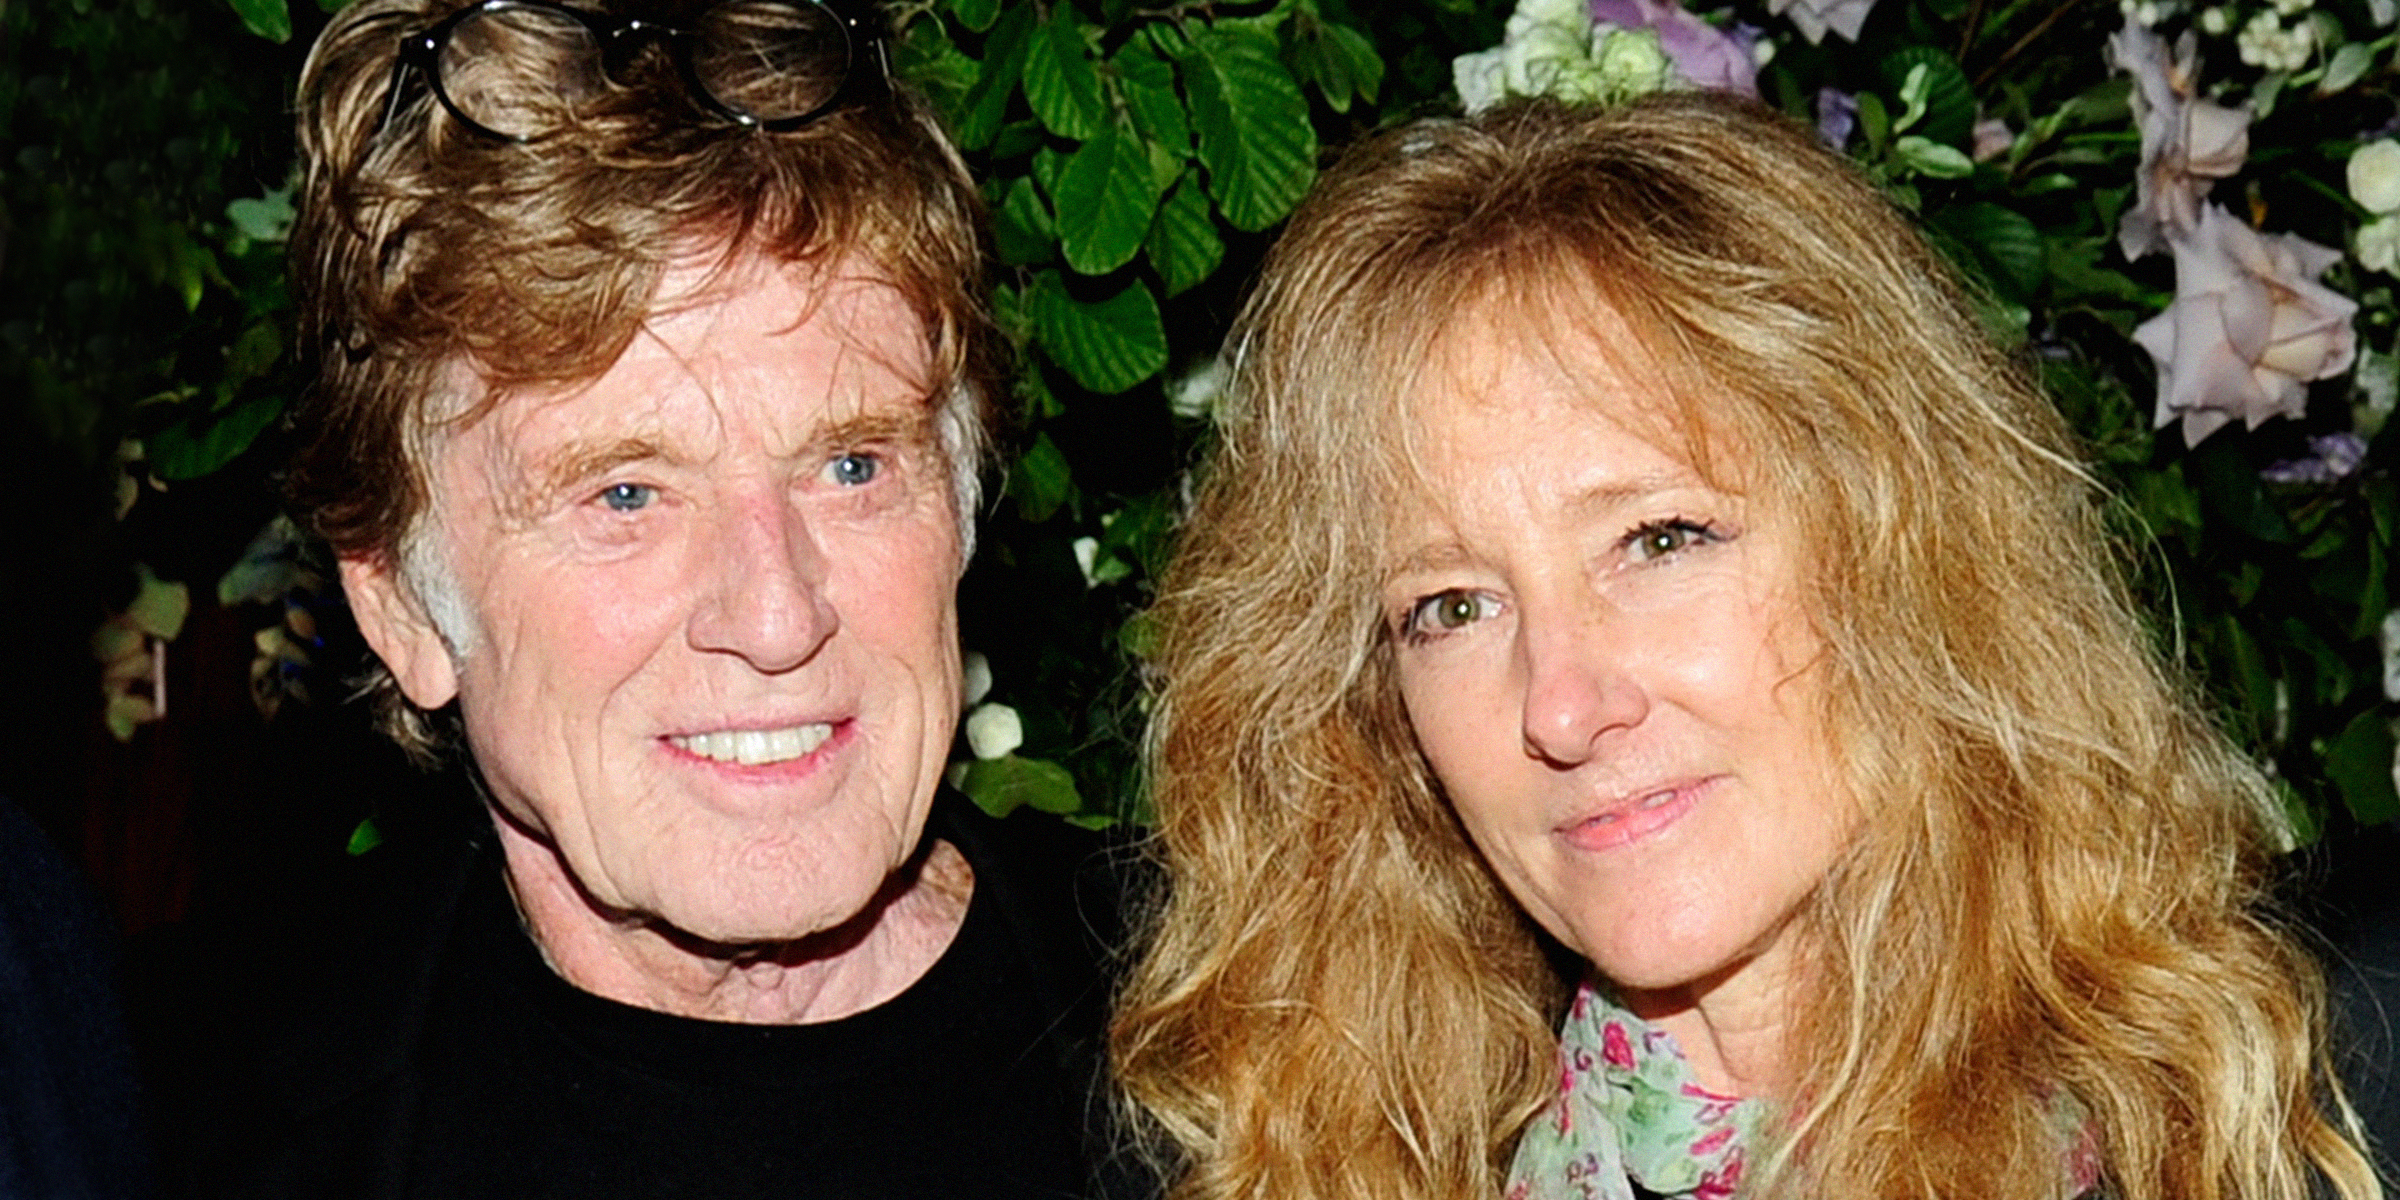 Robert Redford and Shauna Redford | Source: Getty Images